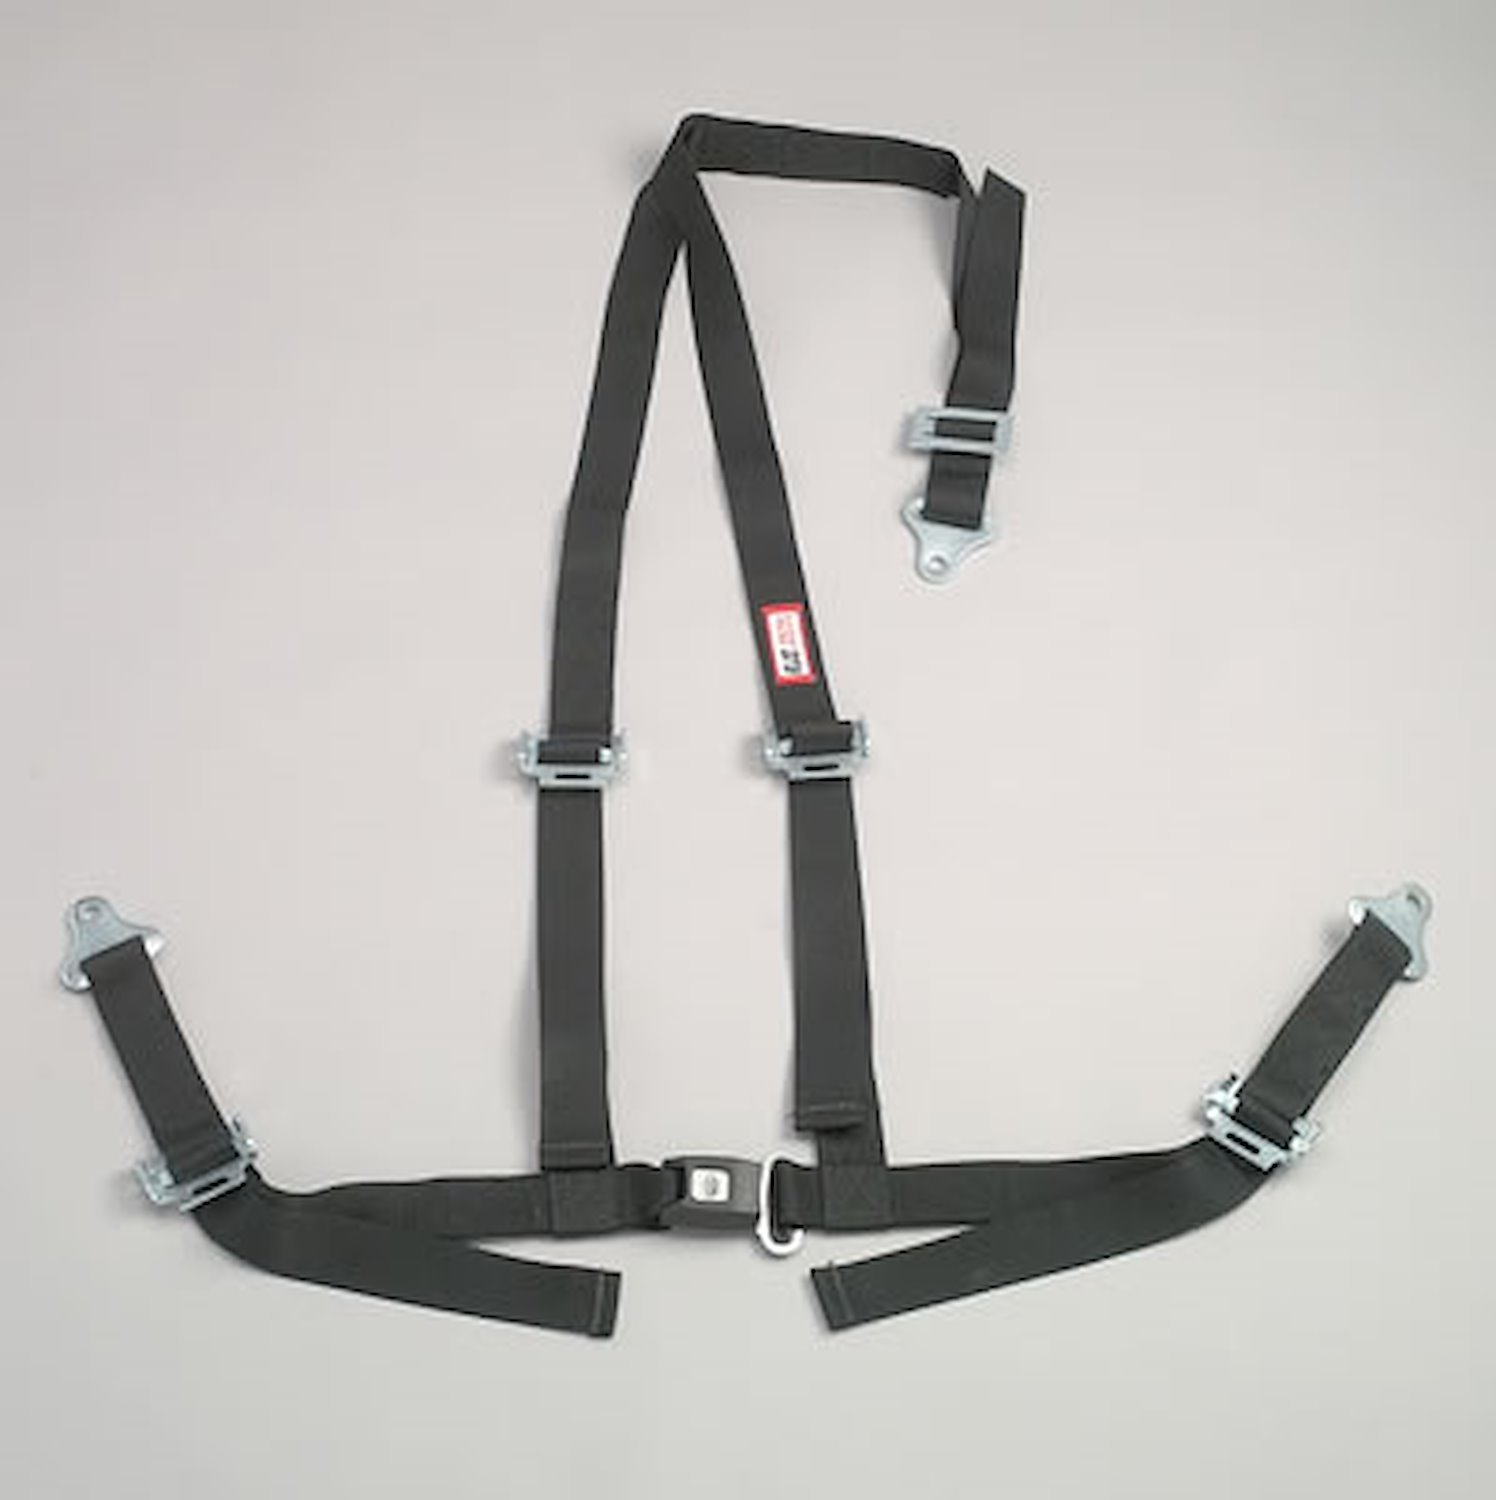 NON-SFI B&T HARNESS 2 PULL UP Lap Belt 2 S. H. V ROLL BAR Mount ALL WRAP ENDS w/STERNUM STRAP BLACK